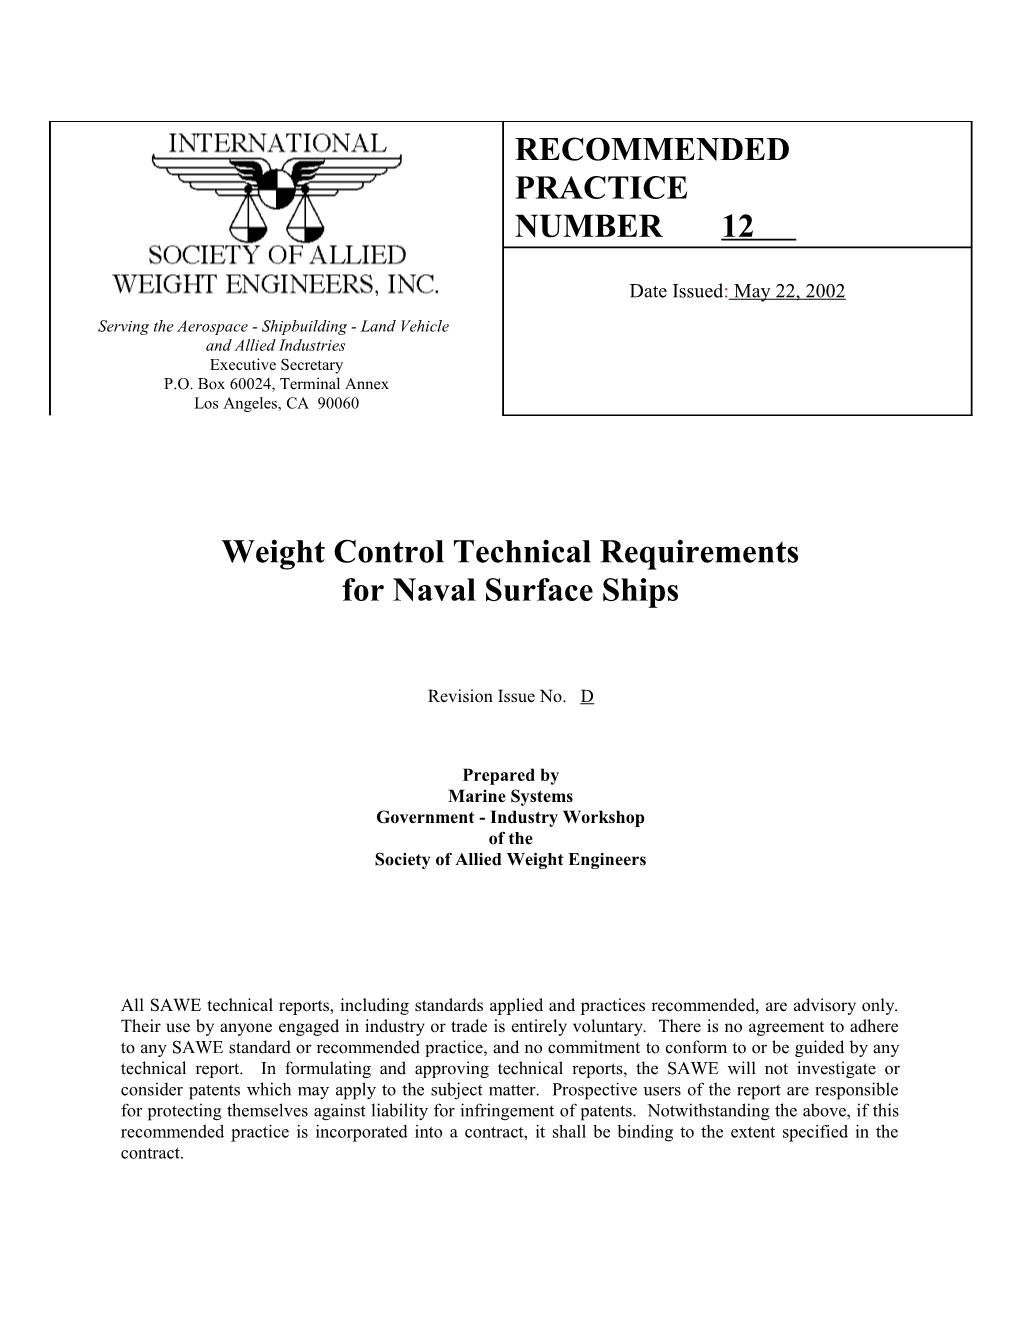 Weight Control Technical Requirements